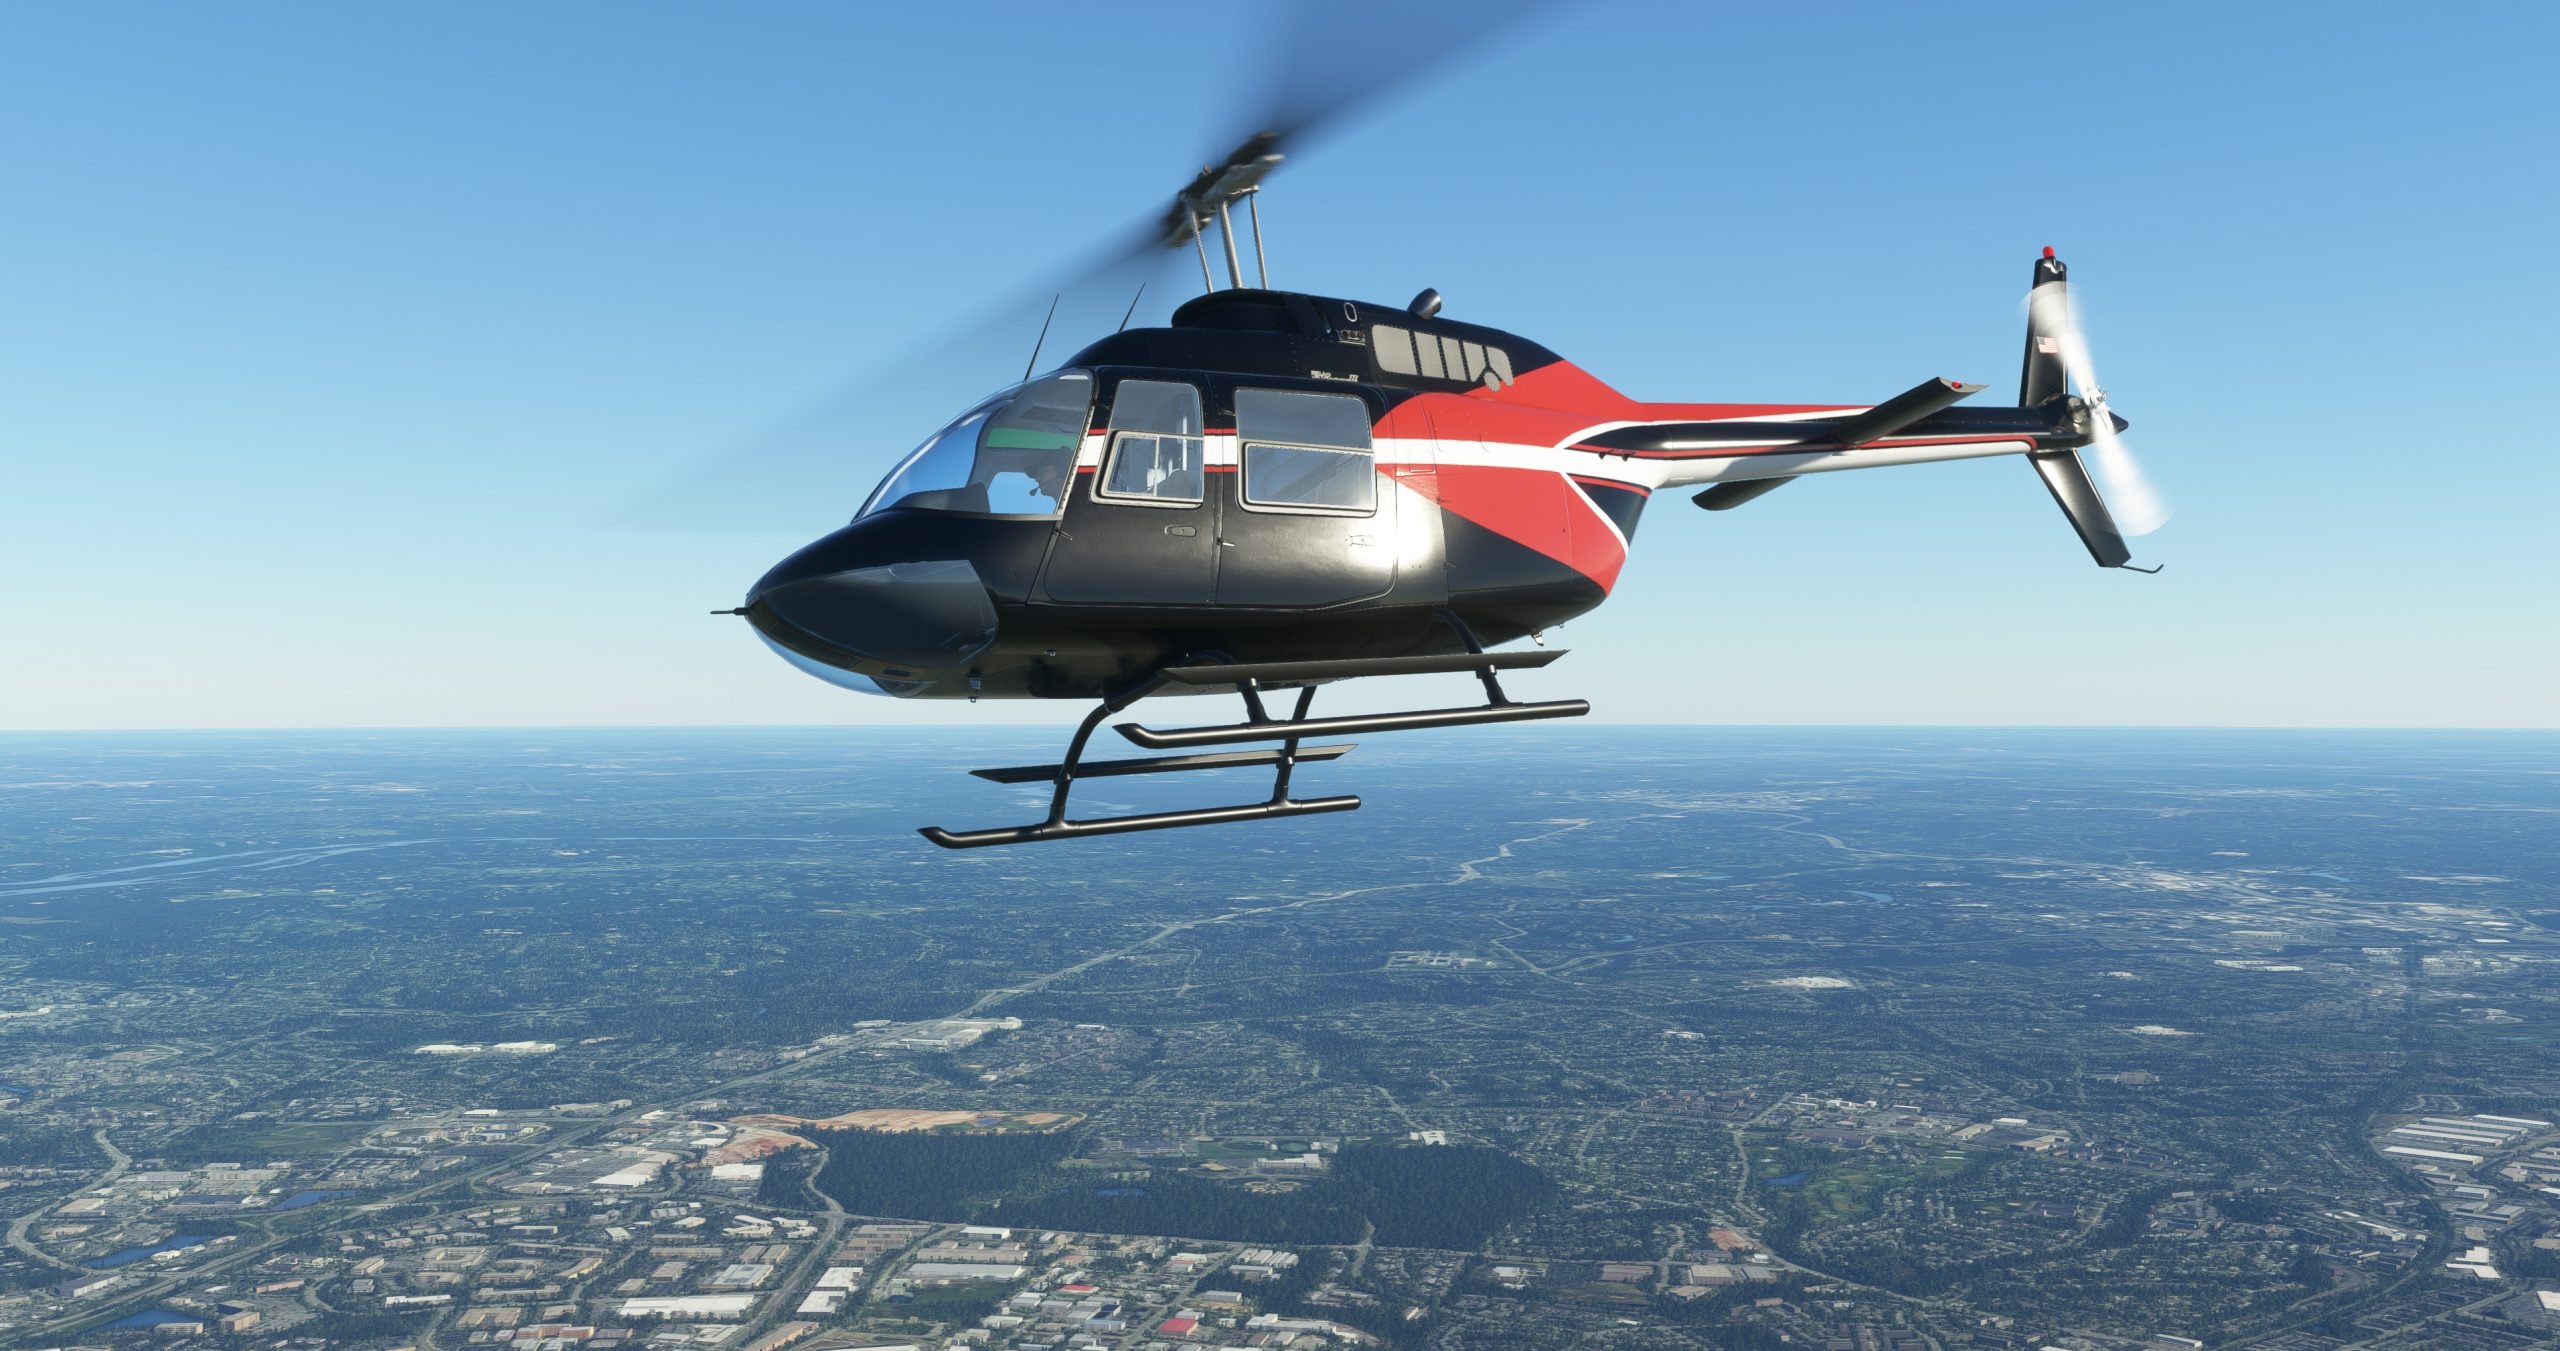 Is this really the first helicopter in Microsoft Flight Simulator